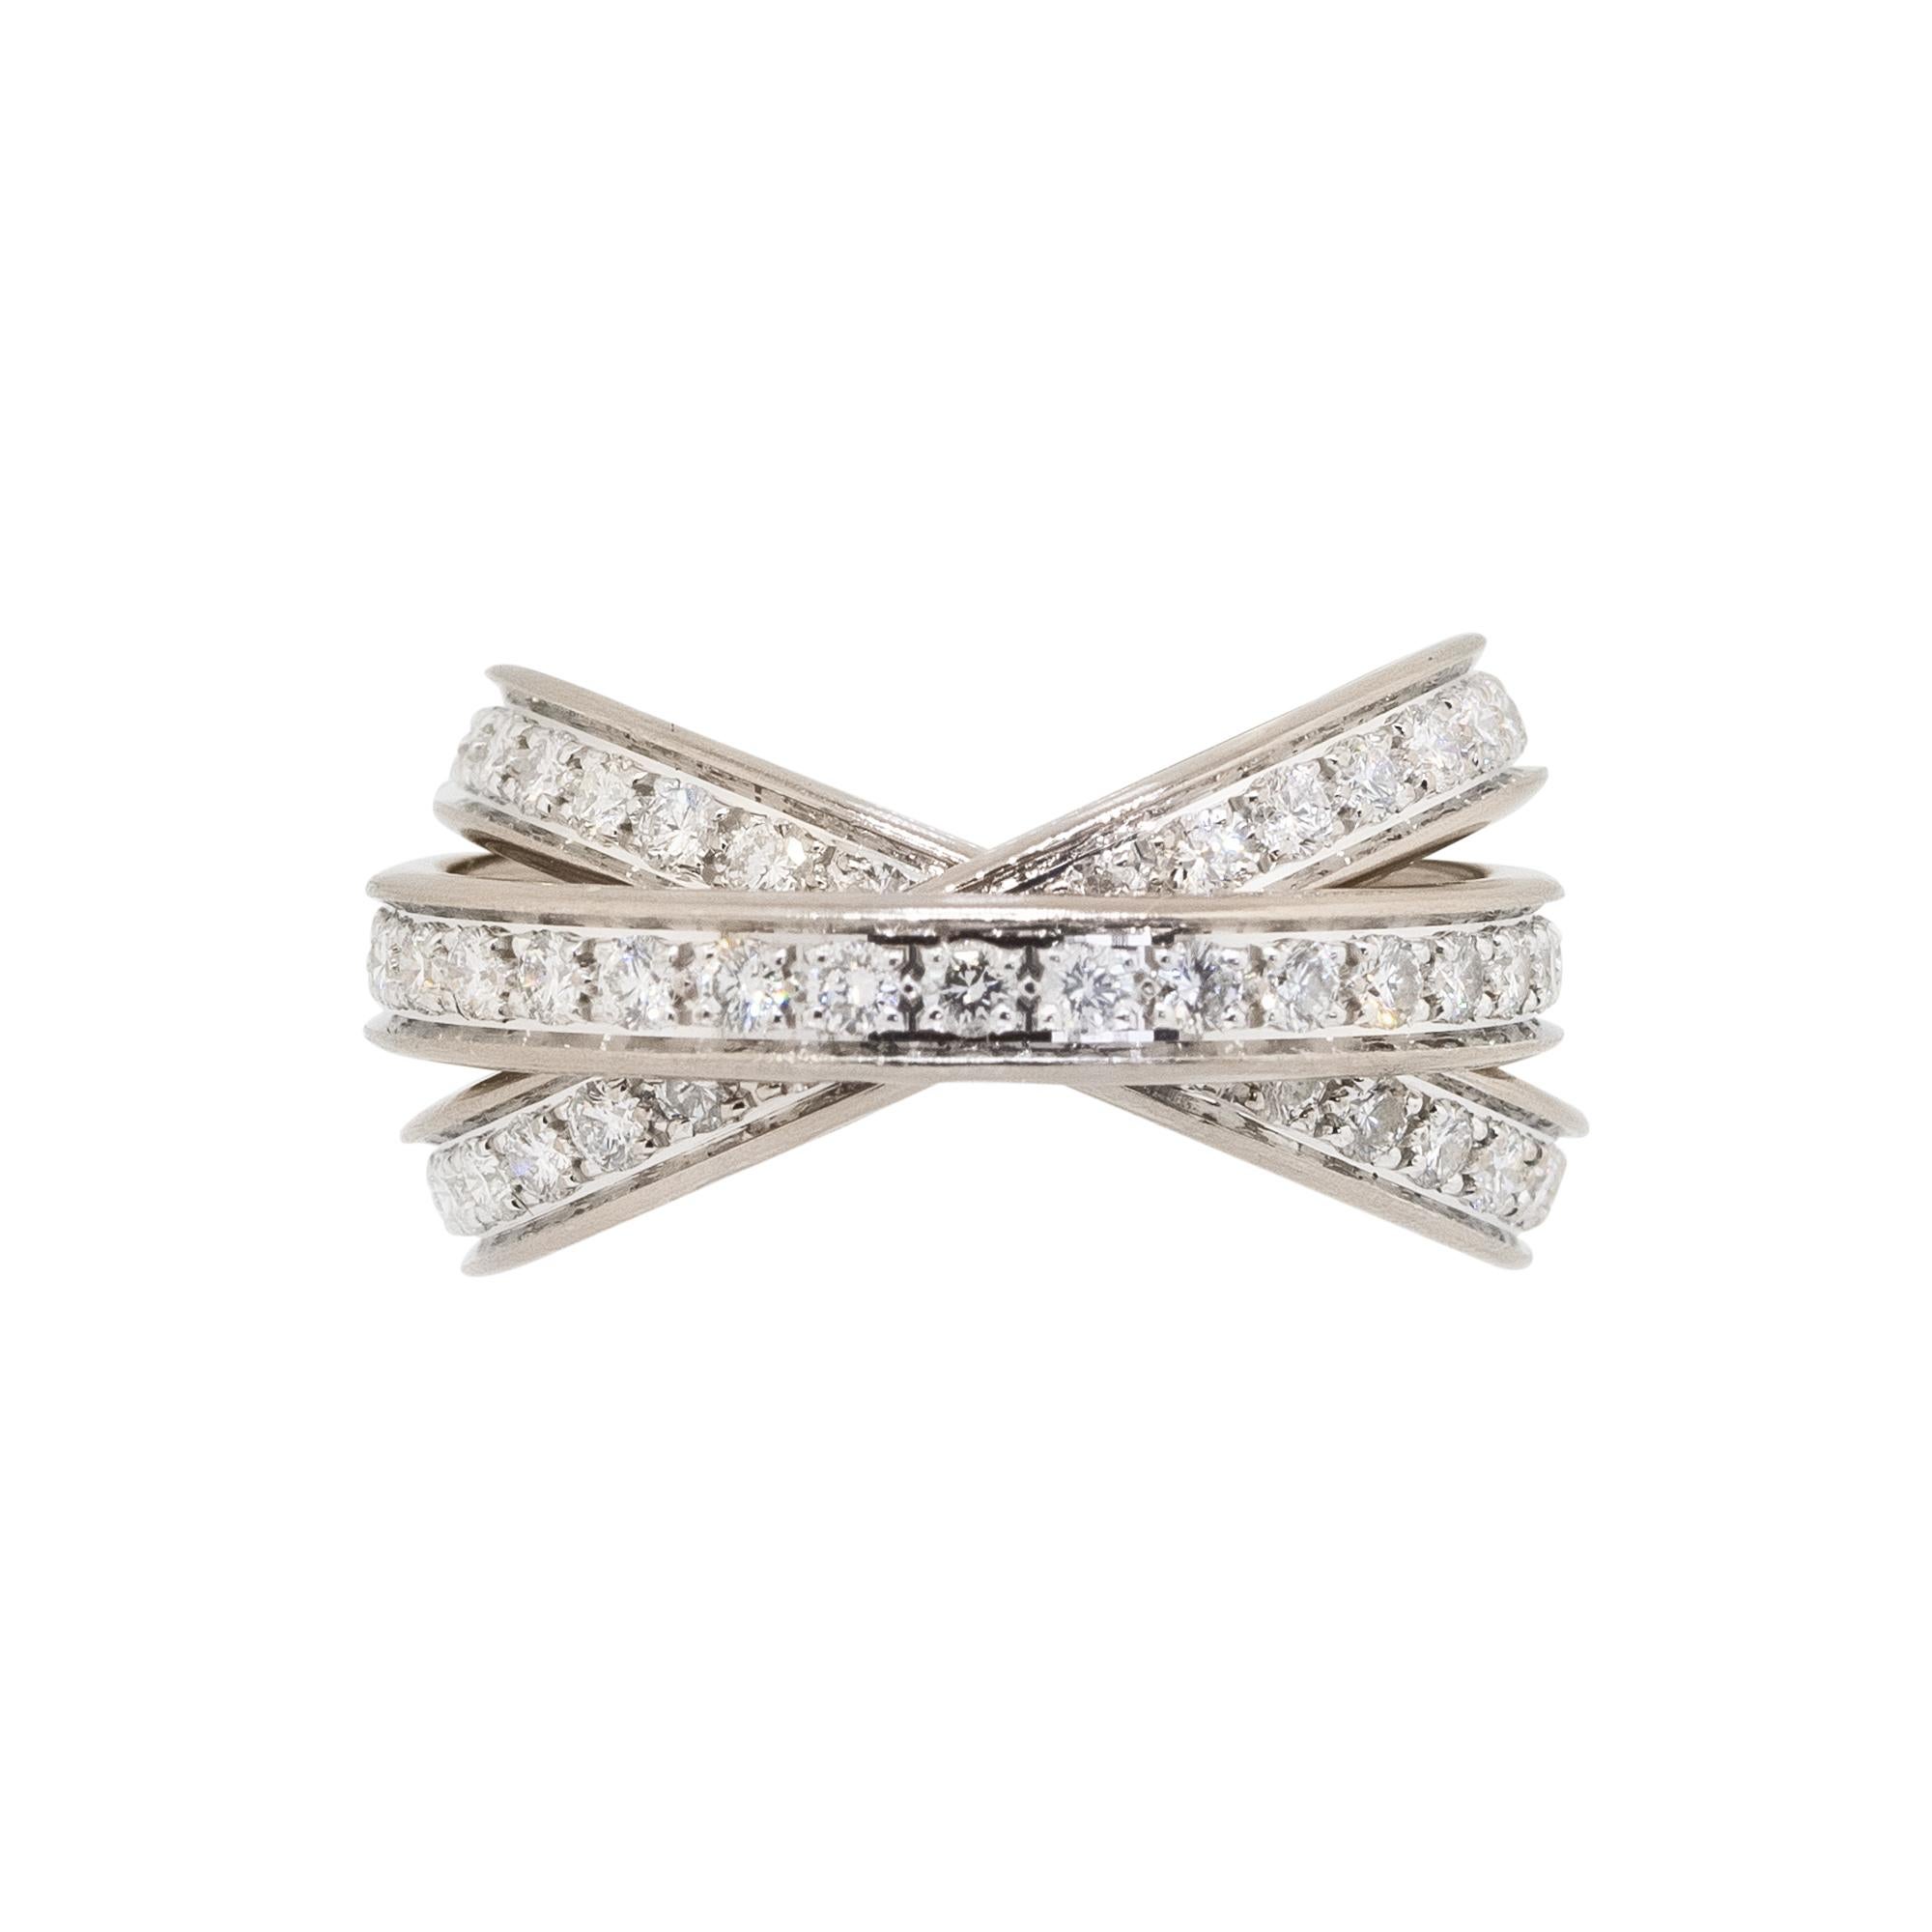 Designer: Cartier
Material: 18k white gold
Diamond Details: Approx. 1.50ctw of round cut Diamonds. Diamonds are G/H in color and VS in clarity
Size: 6.25
Measurements: 23.30mm x 8mm x 23.30mm
Weight: 10g (6.4dwt)
Additional Details: This item comes